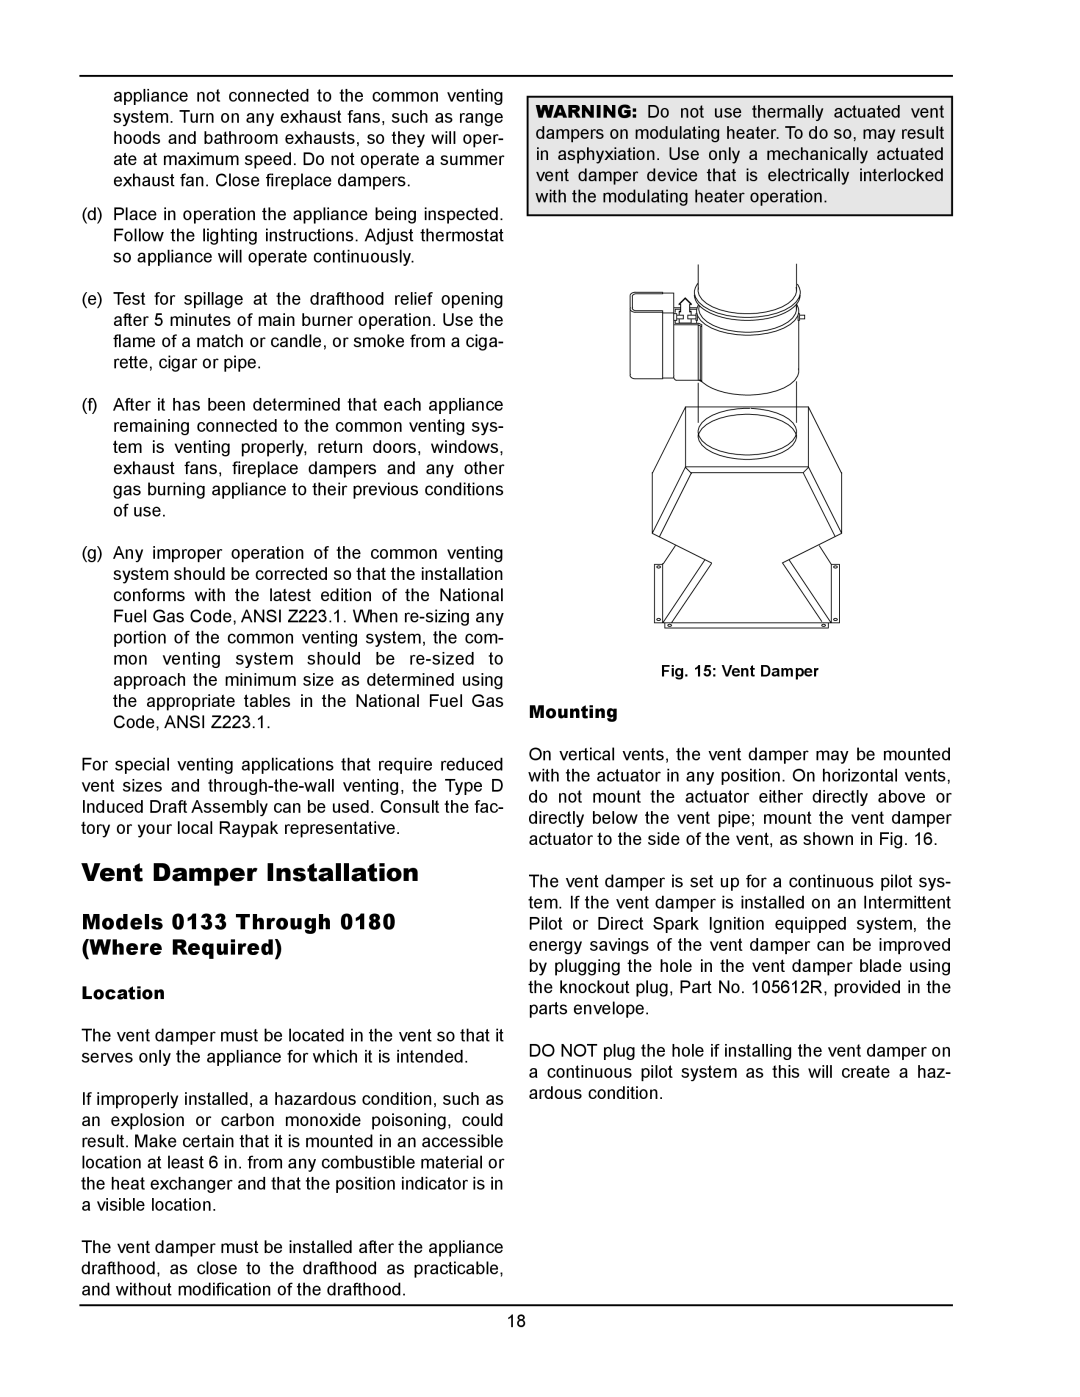 Raypak 1334001 operating instructions Vent Damper Installation, Models 0133 Through 0180 Where Required, Location, Mounting 